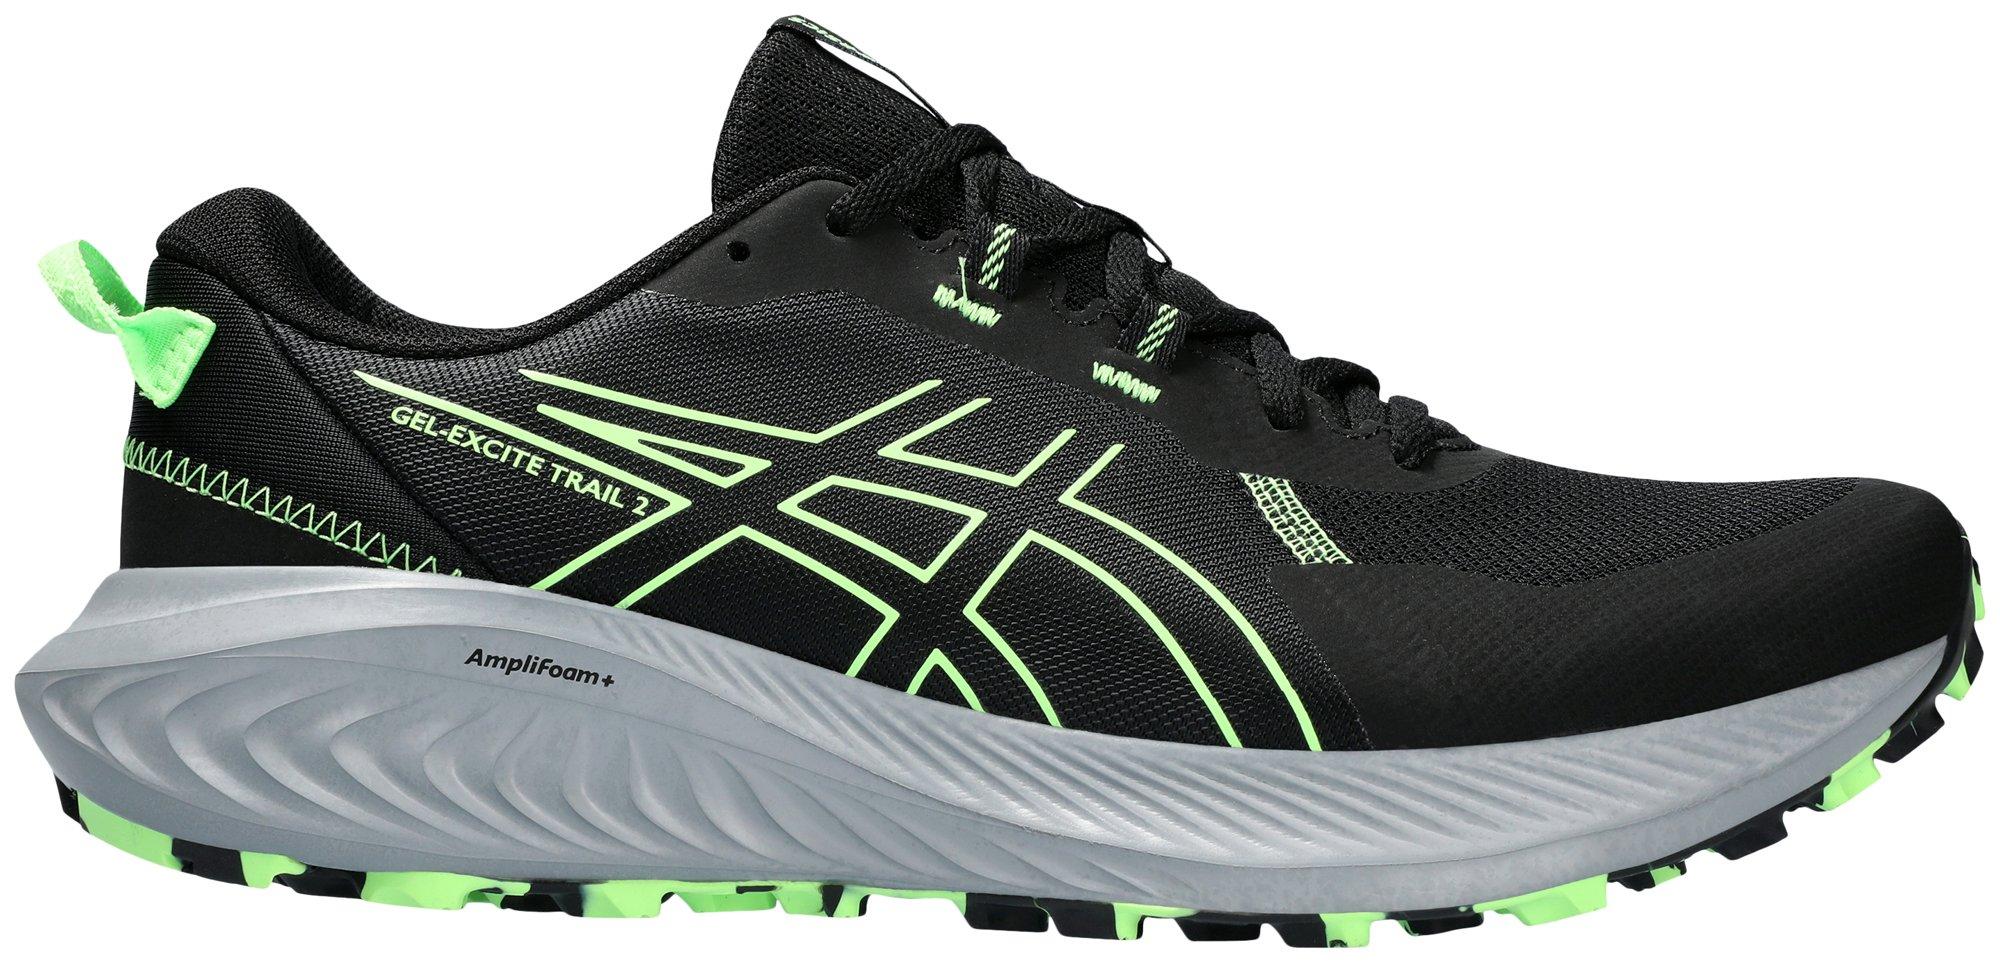 Mens Gel Excite Trail 2 Athletic Shoes.